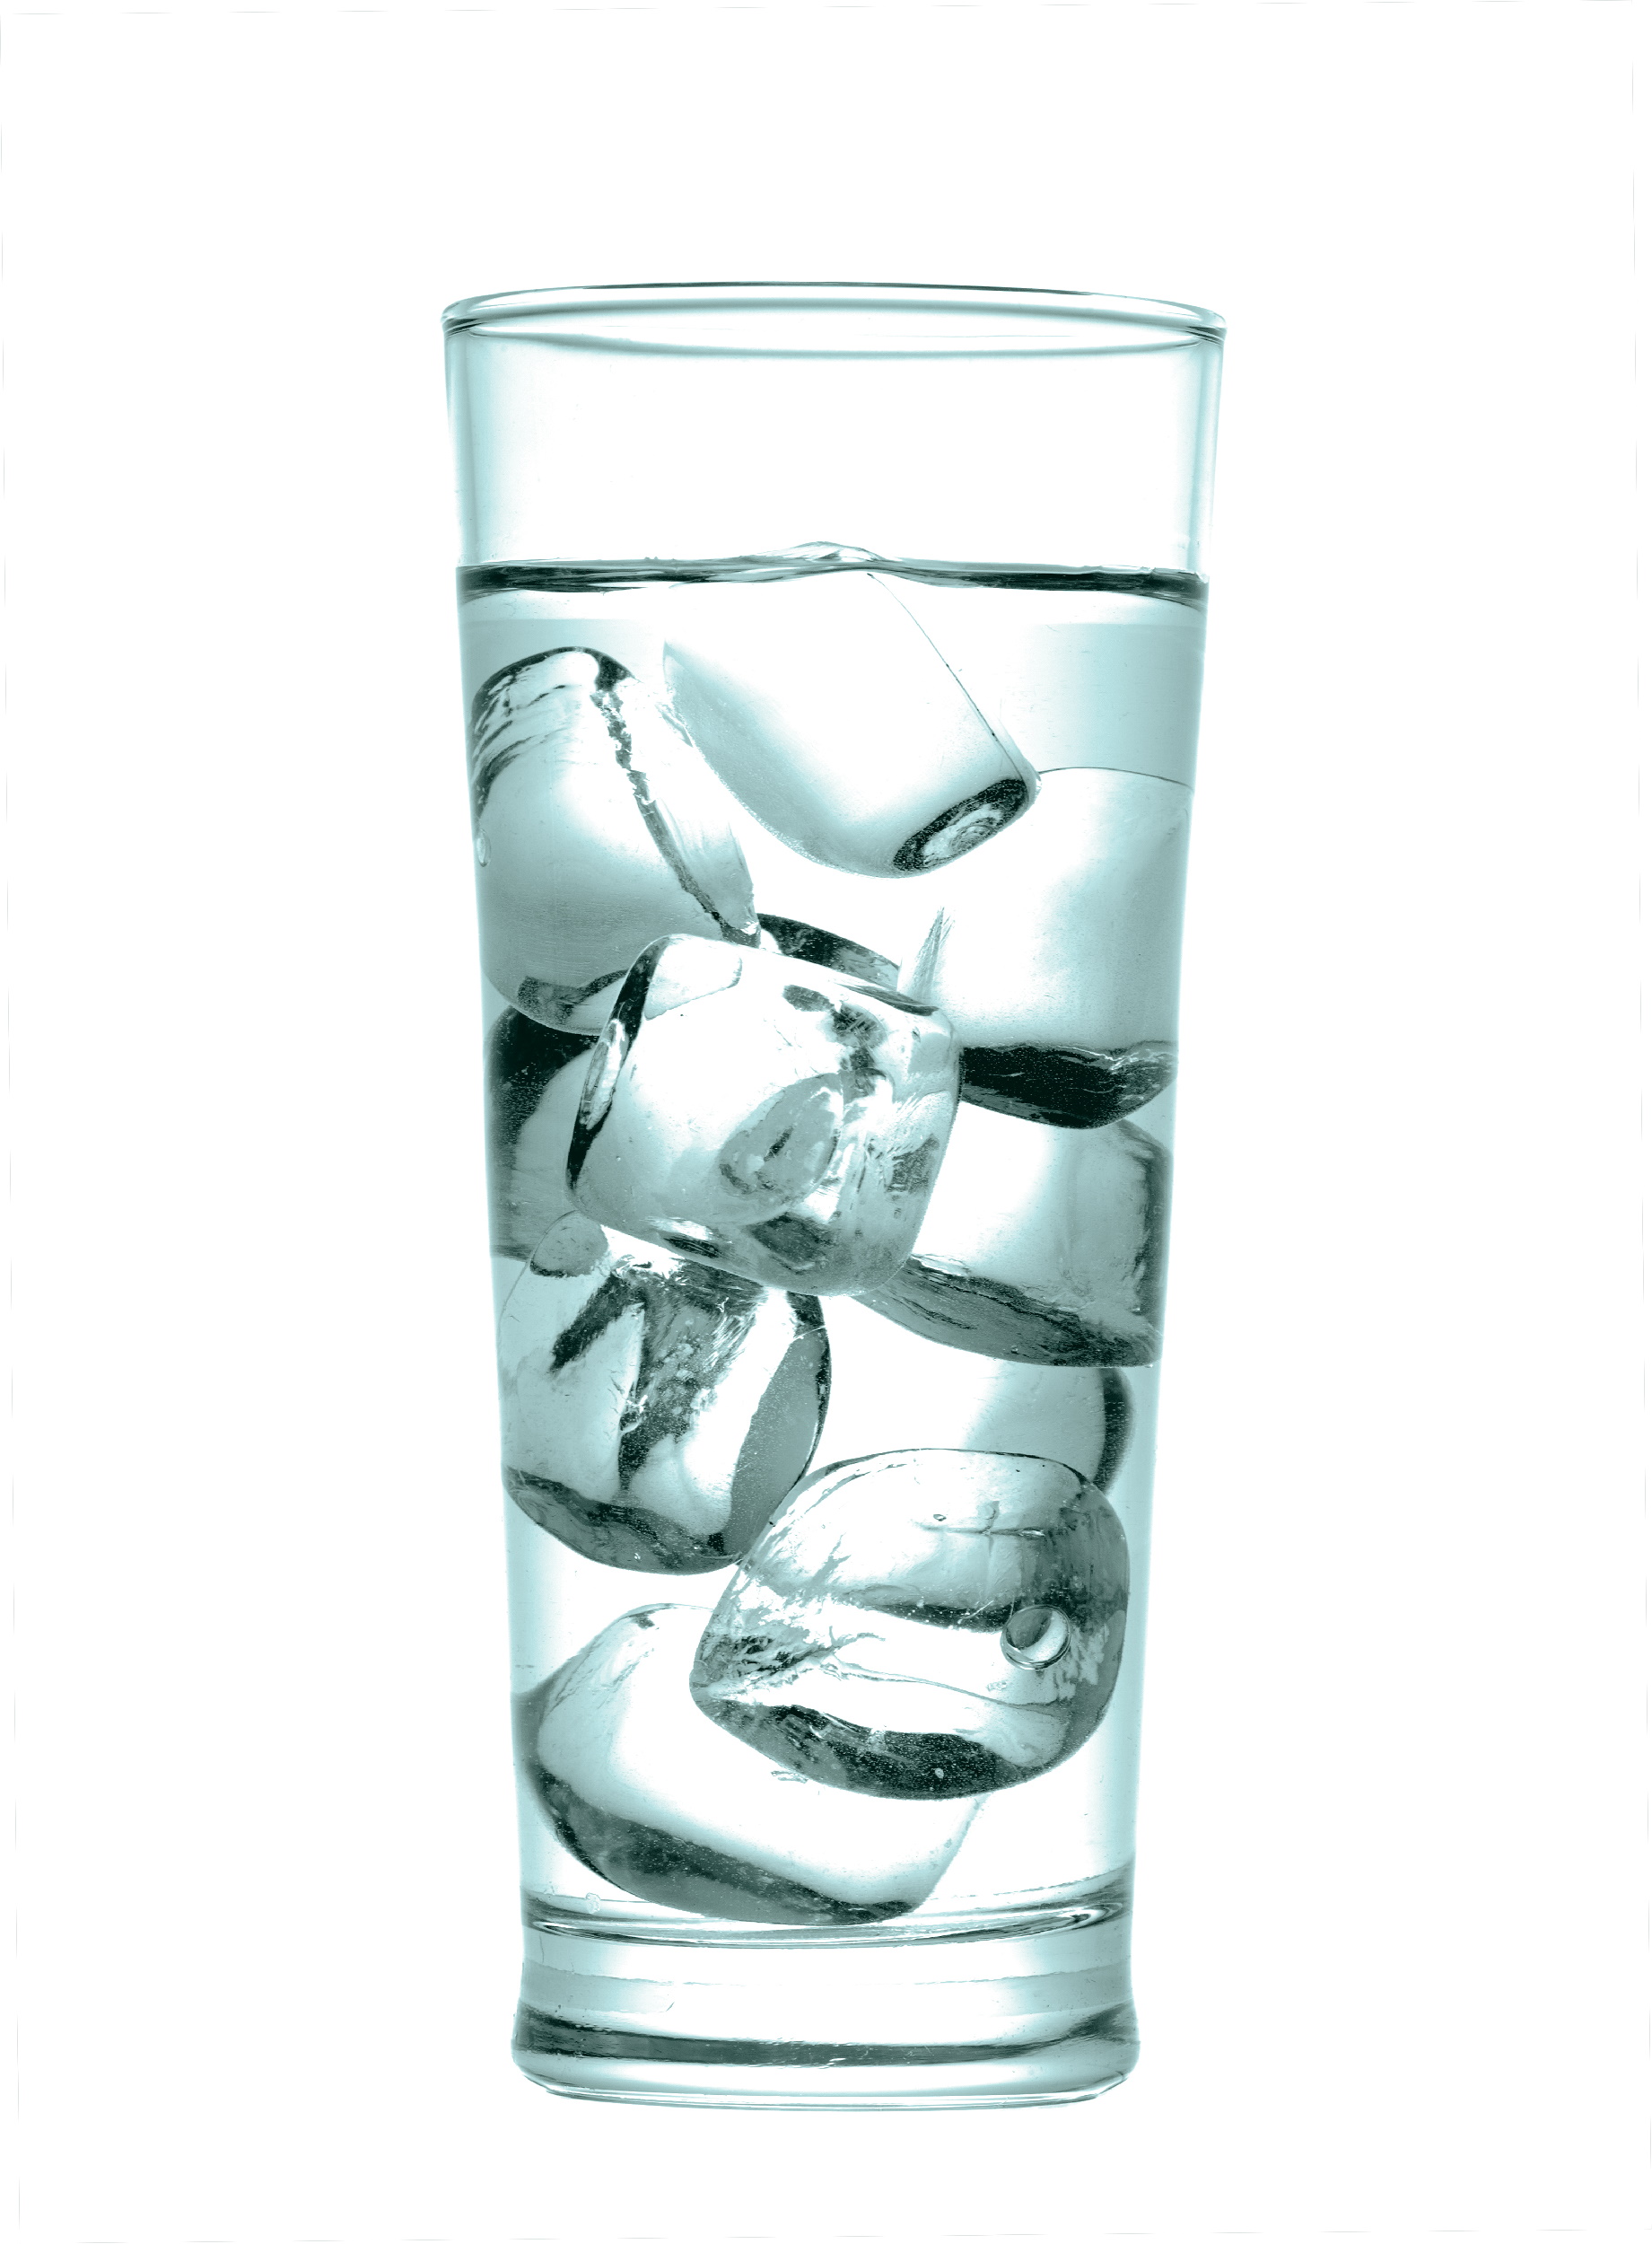 Drinking a Glass of Water